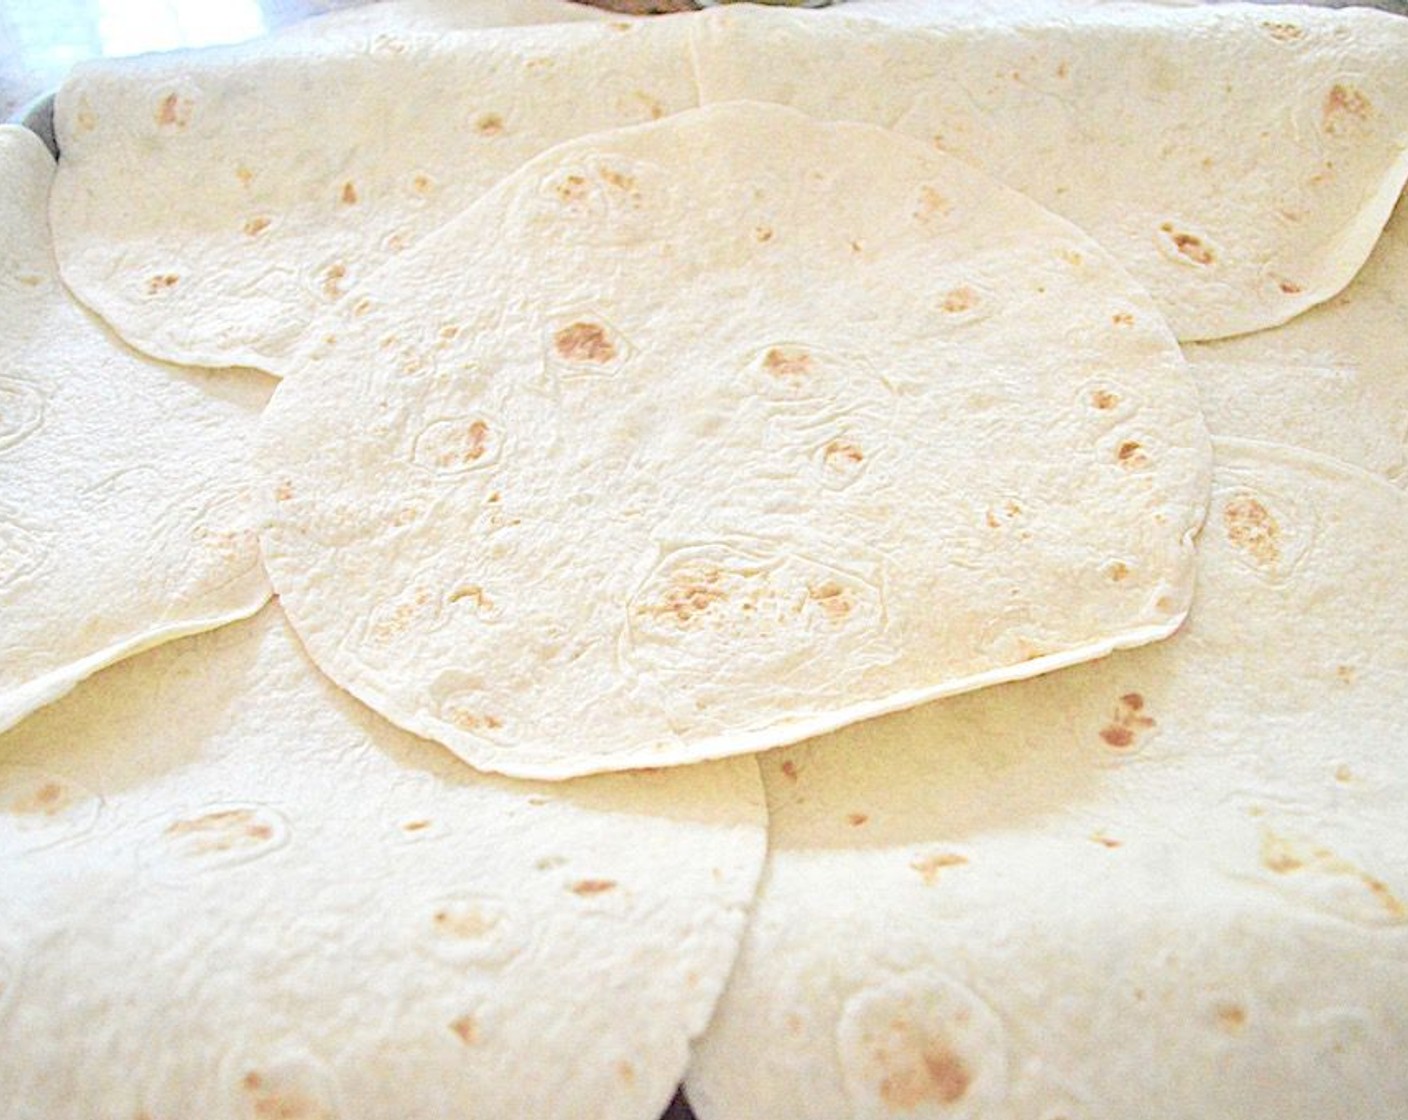 step 6 Take Flour Tortillas (7). Place 6 of them around the edge of the sheet tray with almost half of each tortilla hanging over the edge. In the tray the sides should all be connected. Then place another tortilla in the center so that there is a solid tortilla base.